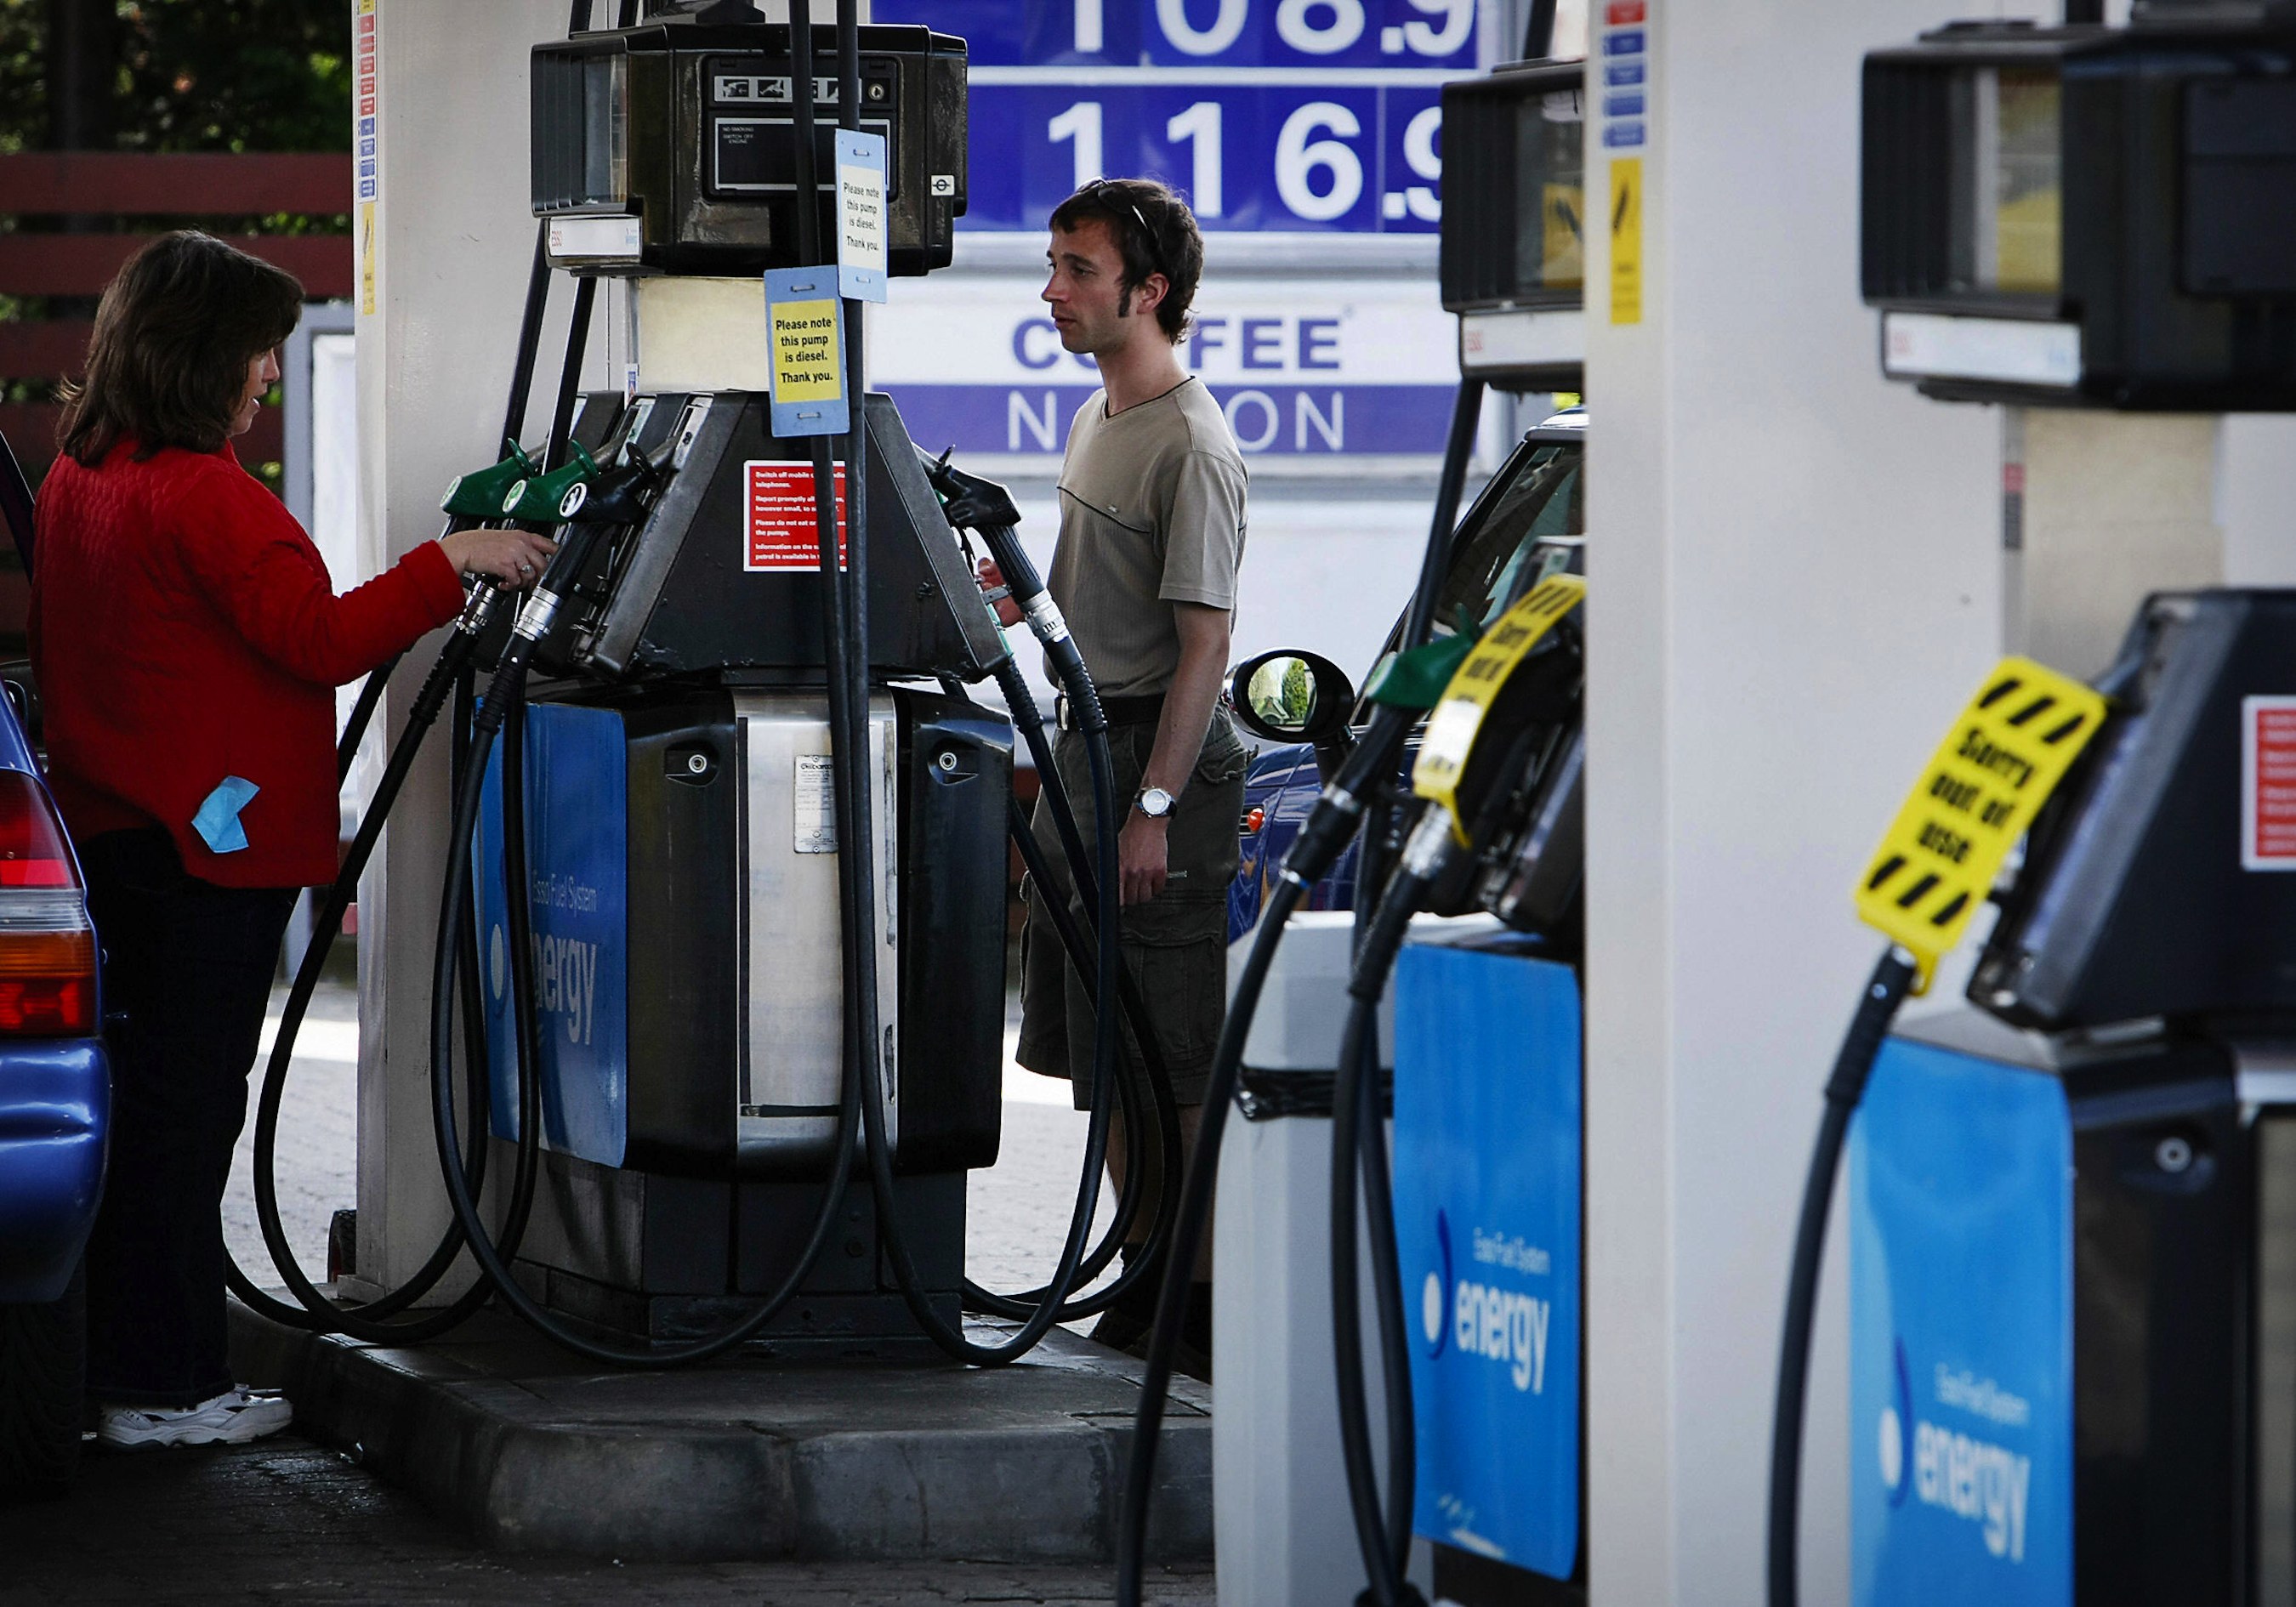 Petrol prices at motorway service branded a rip-off